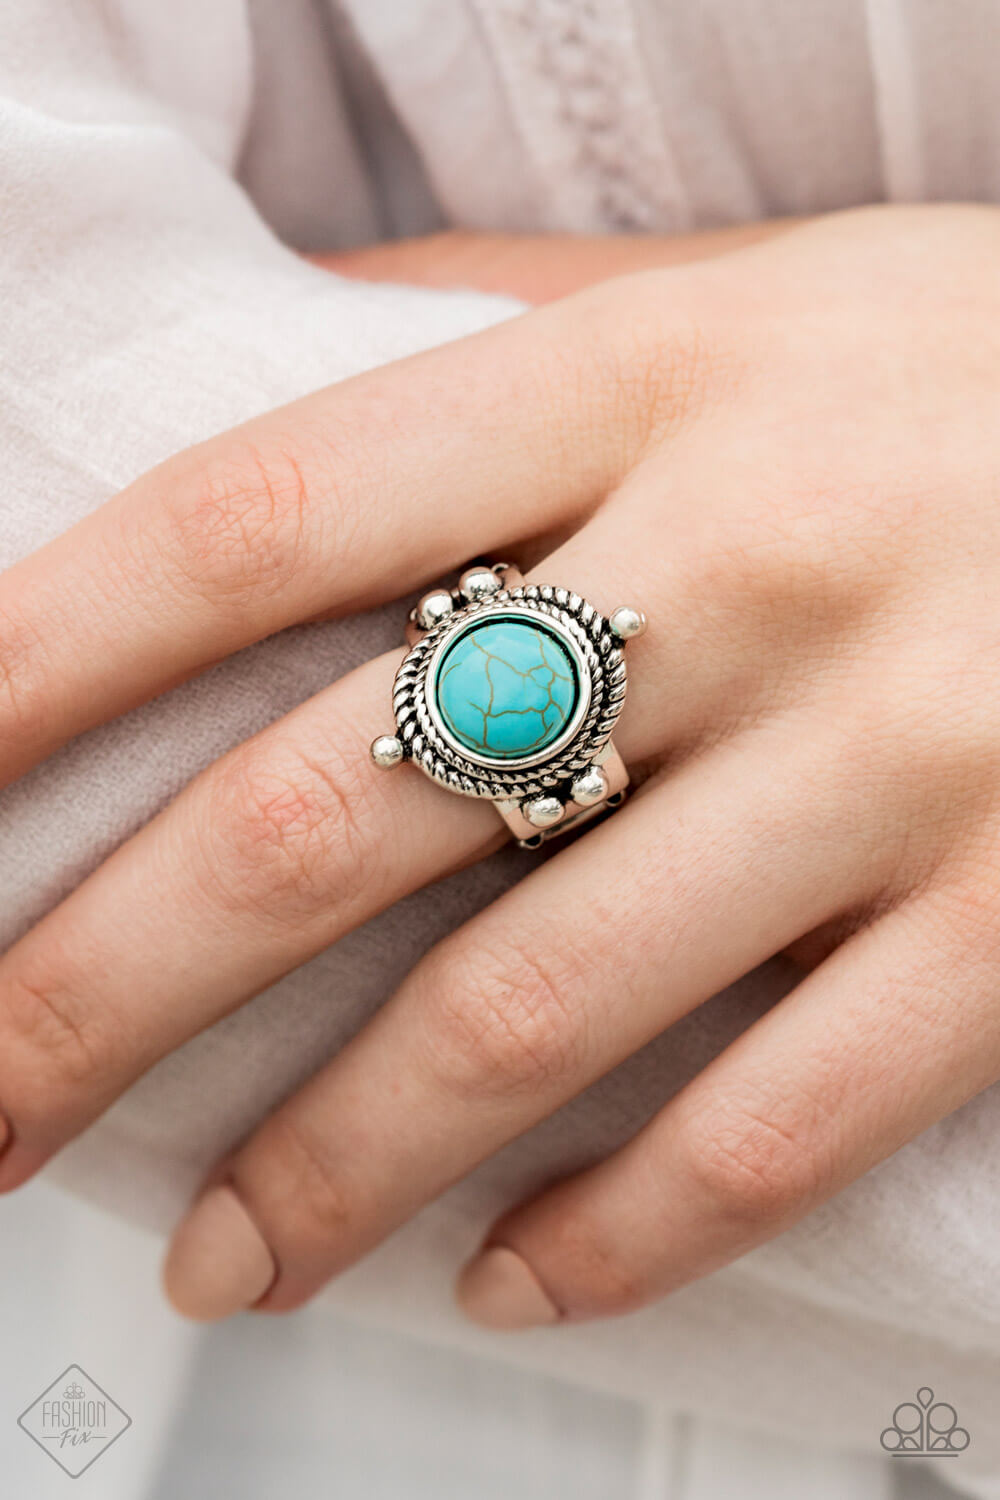 Prone To Wander Blue Turquoise Ring - Princess Glam Shop